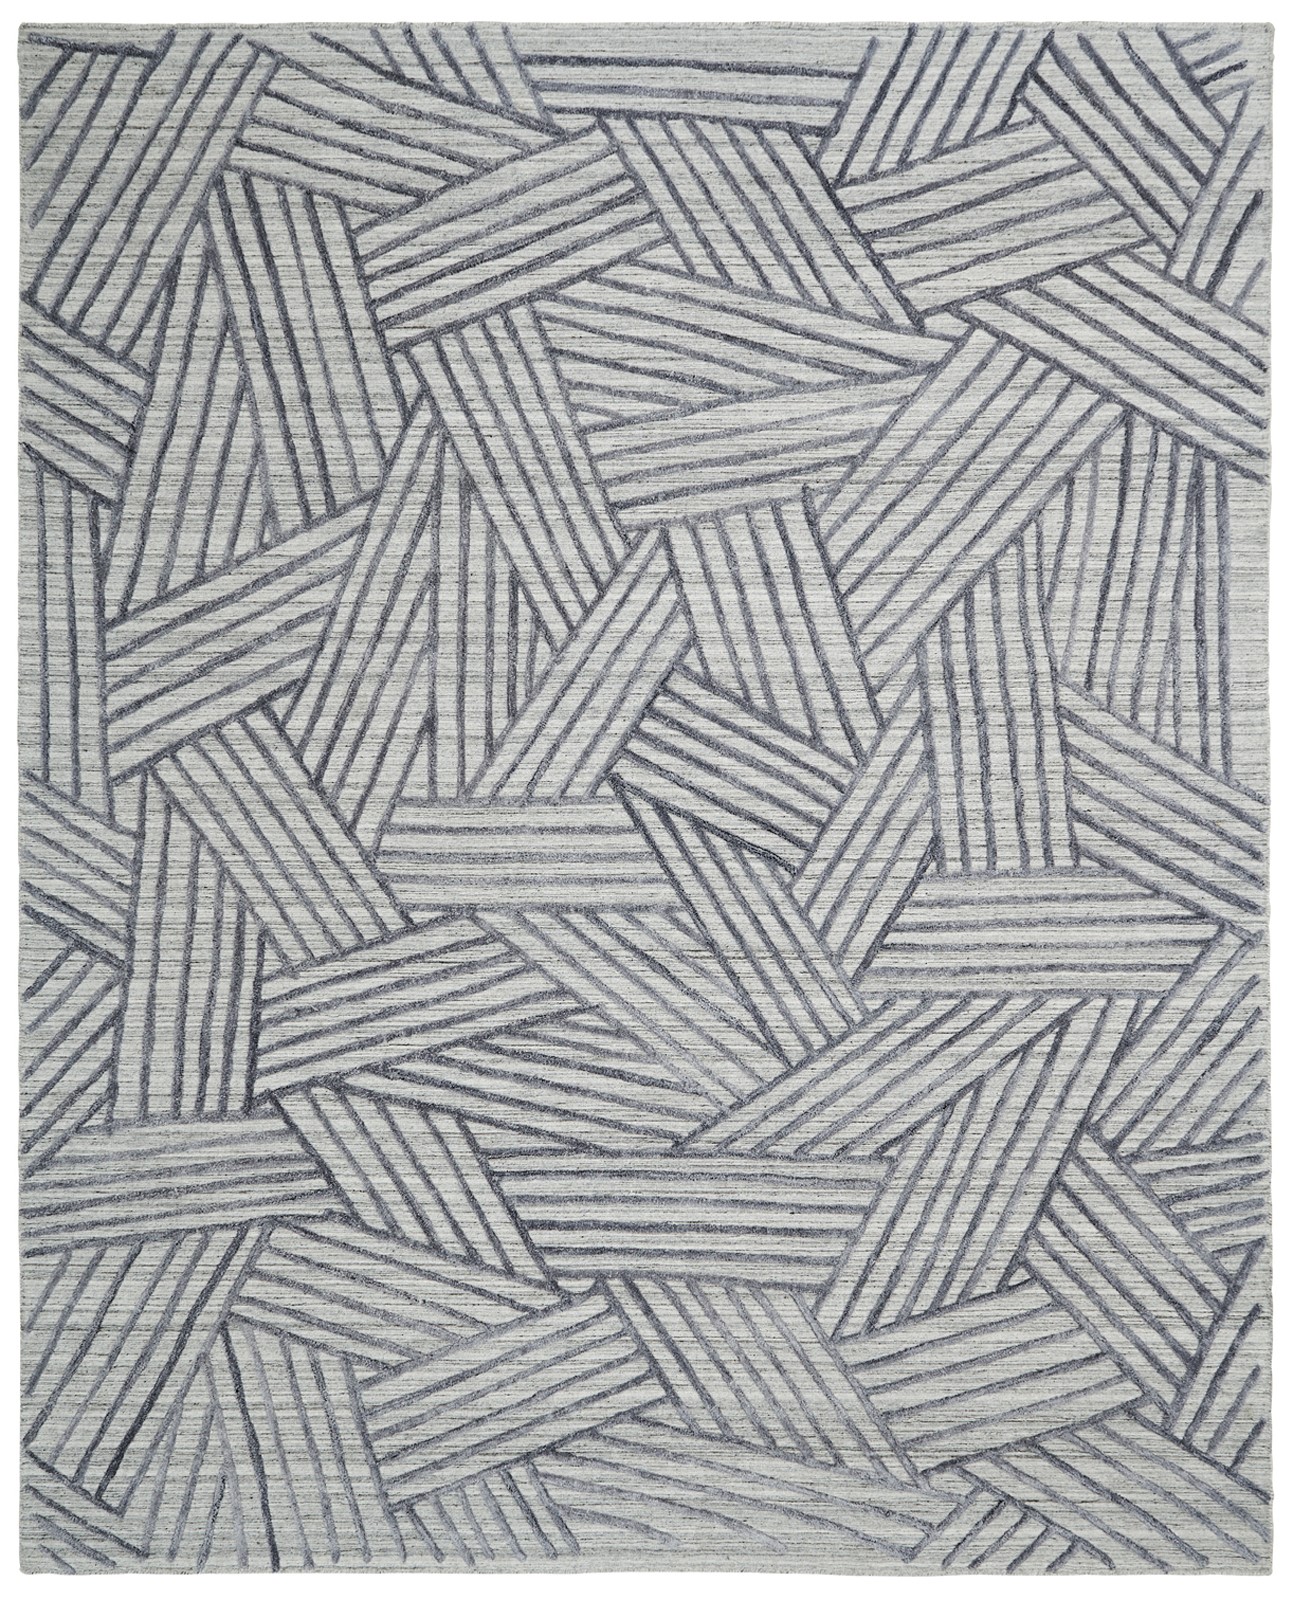 Hand-knotted area rug in abstract weaving pattern in grey and black.